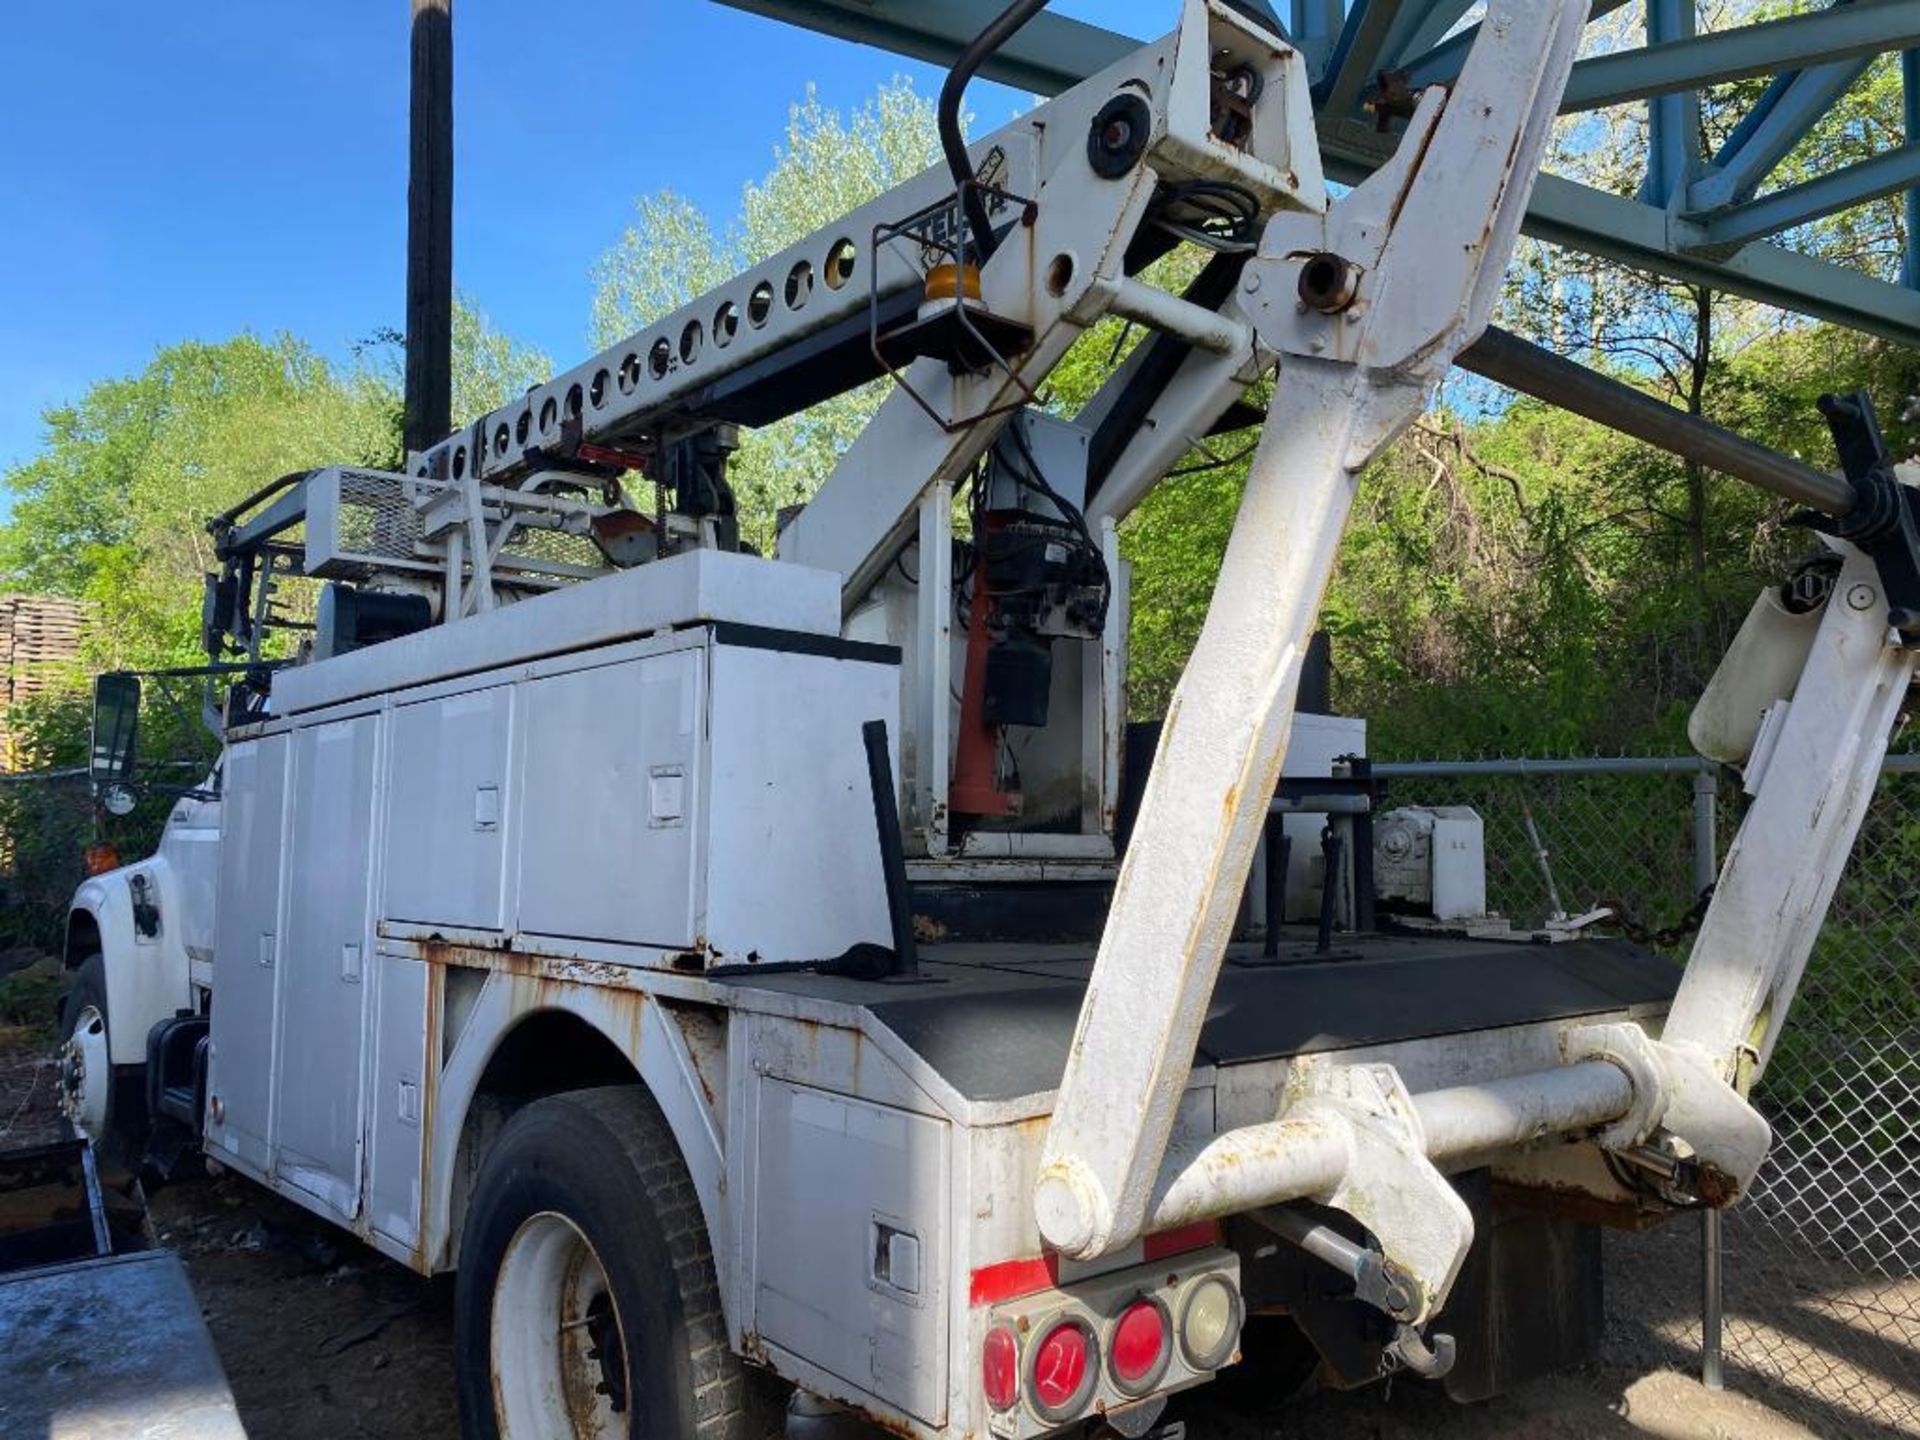 1997 Ford F-800 40ft Bucket Truck (located offsite-please read full description) - Image 9 of 21